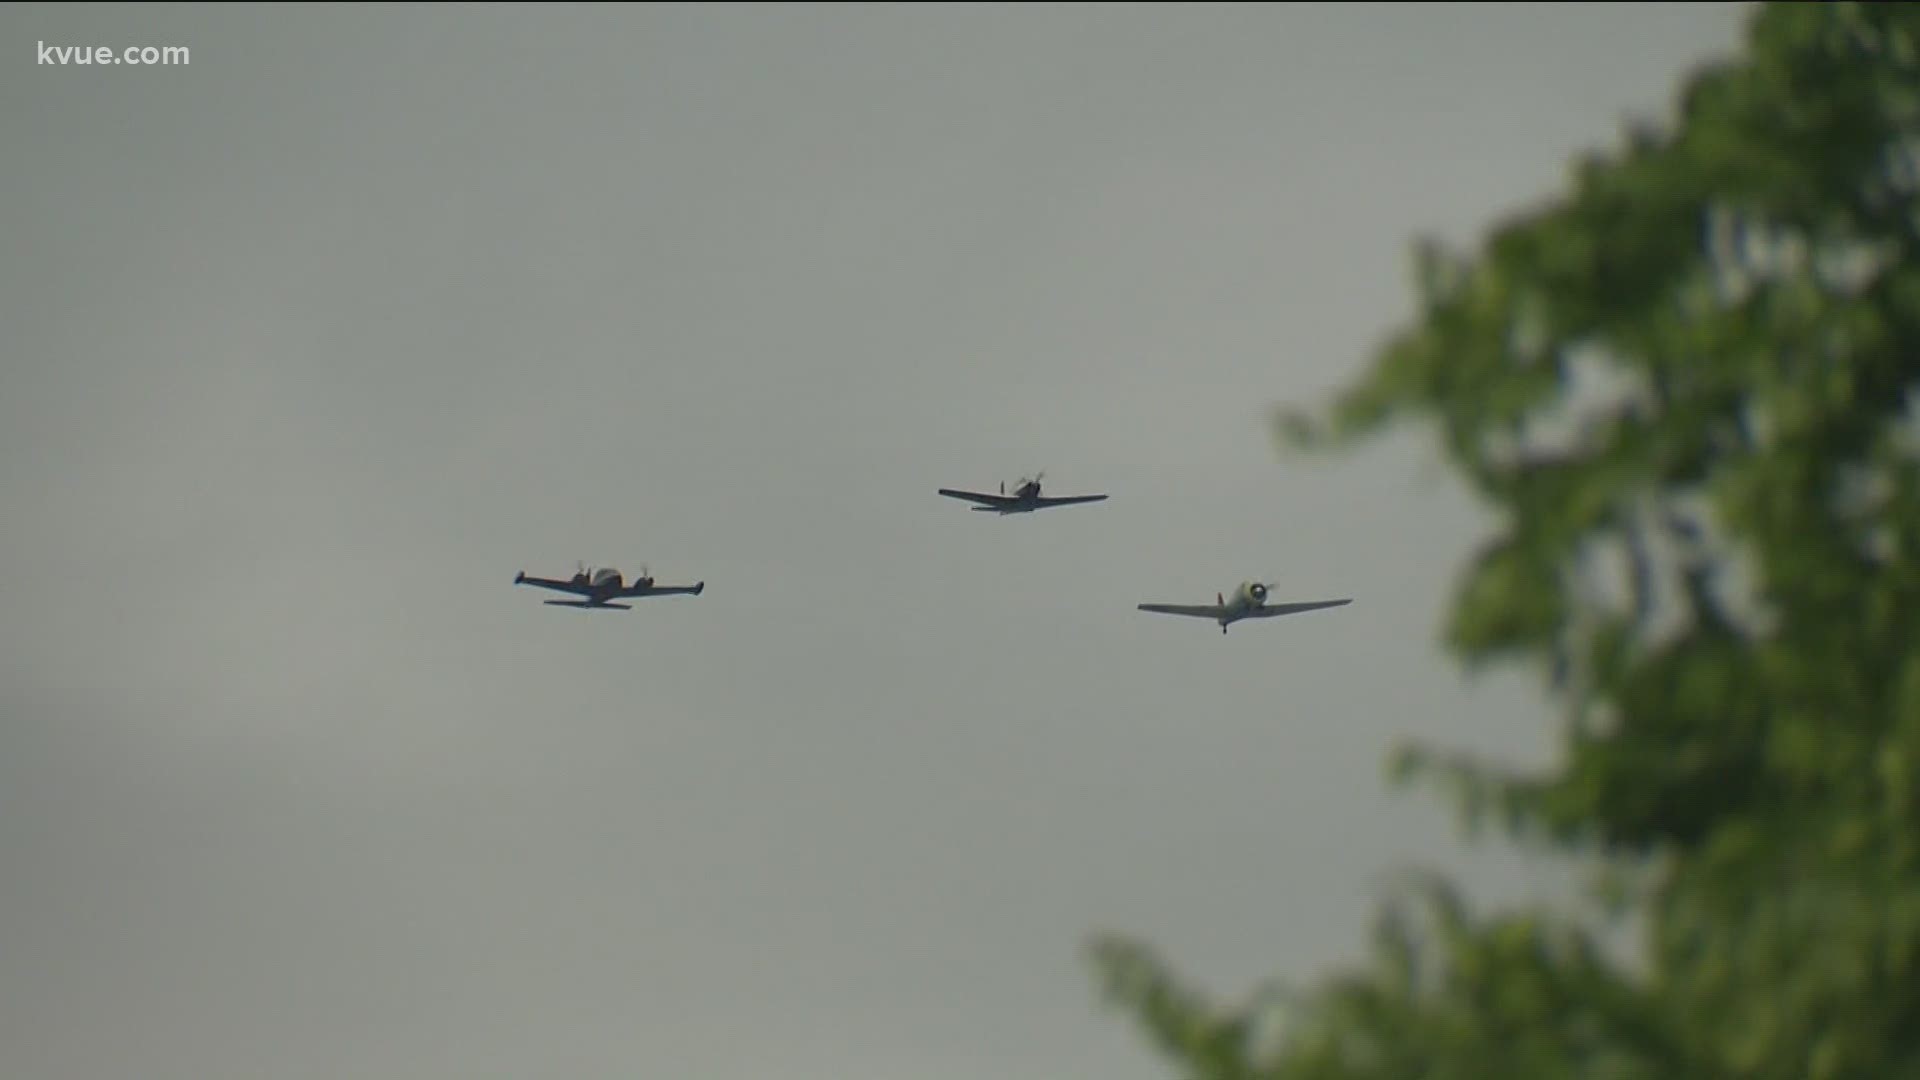 The flyover was to commemorate Memorial Day and to lift the spirits of those affected by the coronavirus pandemic.